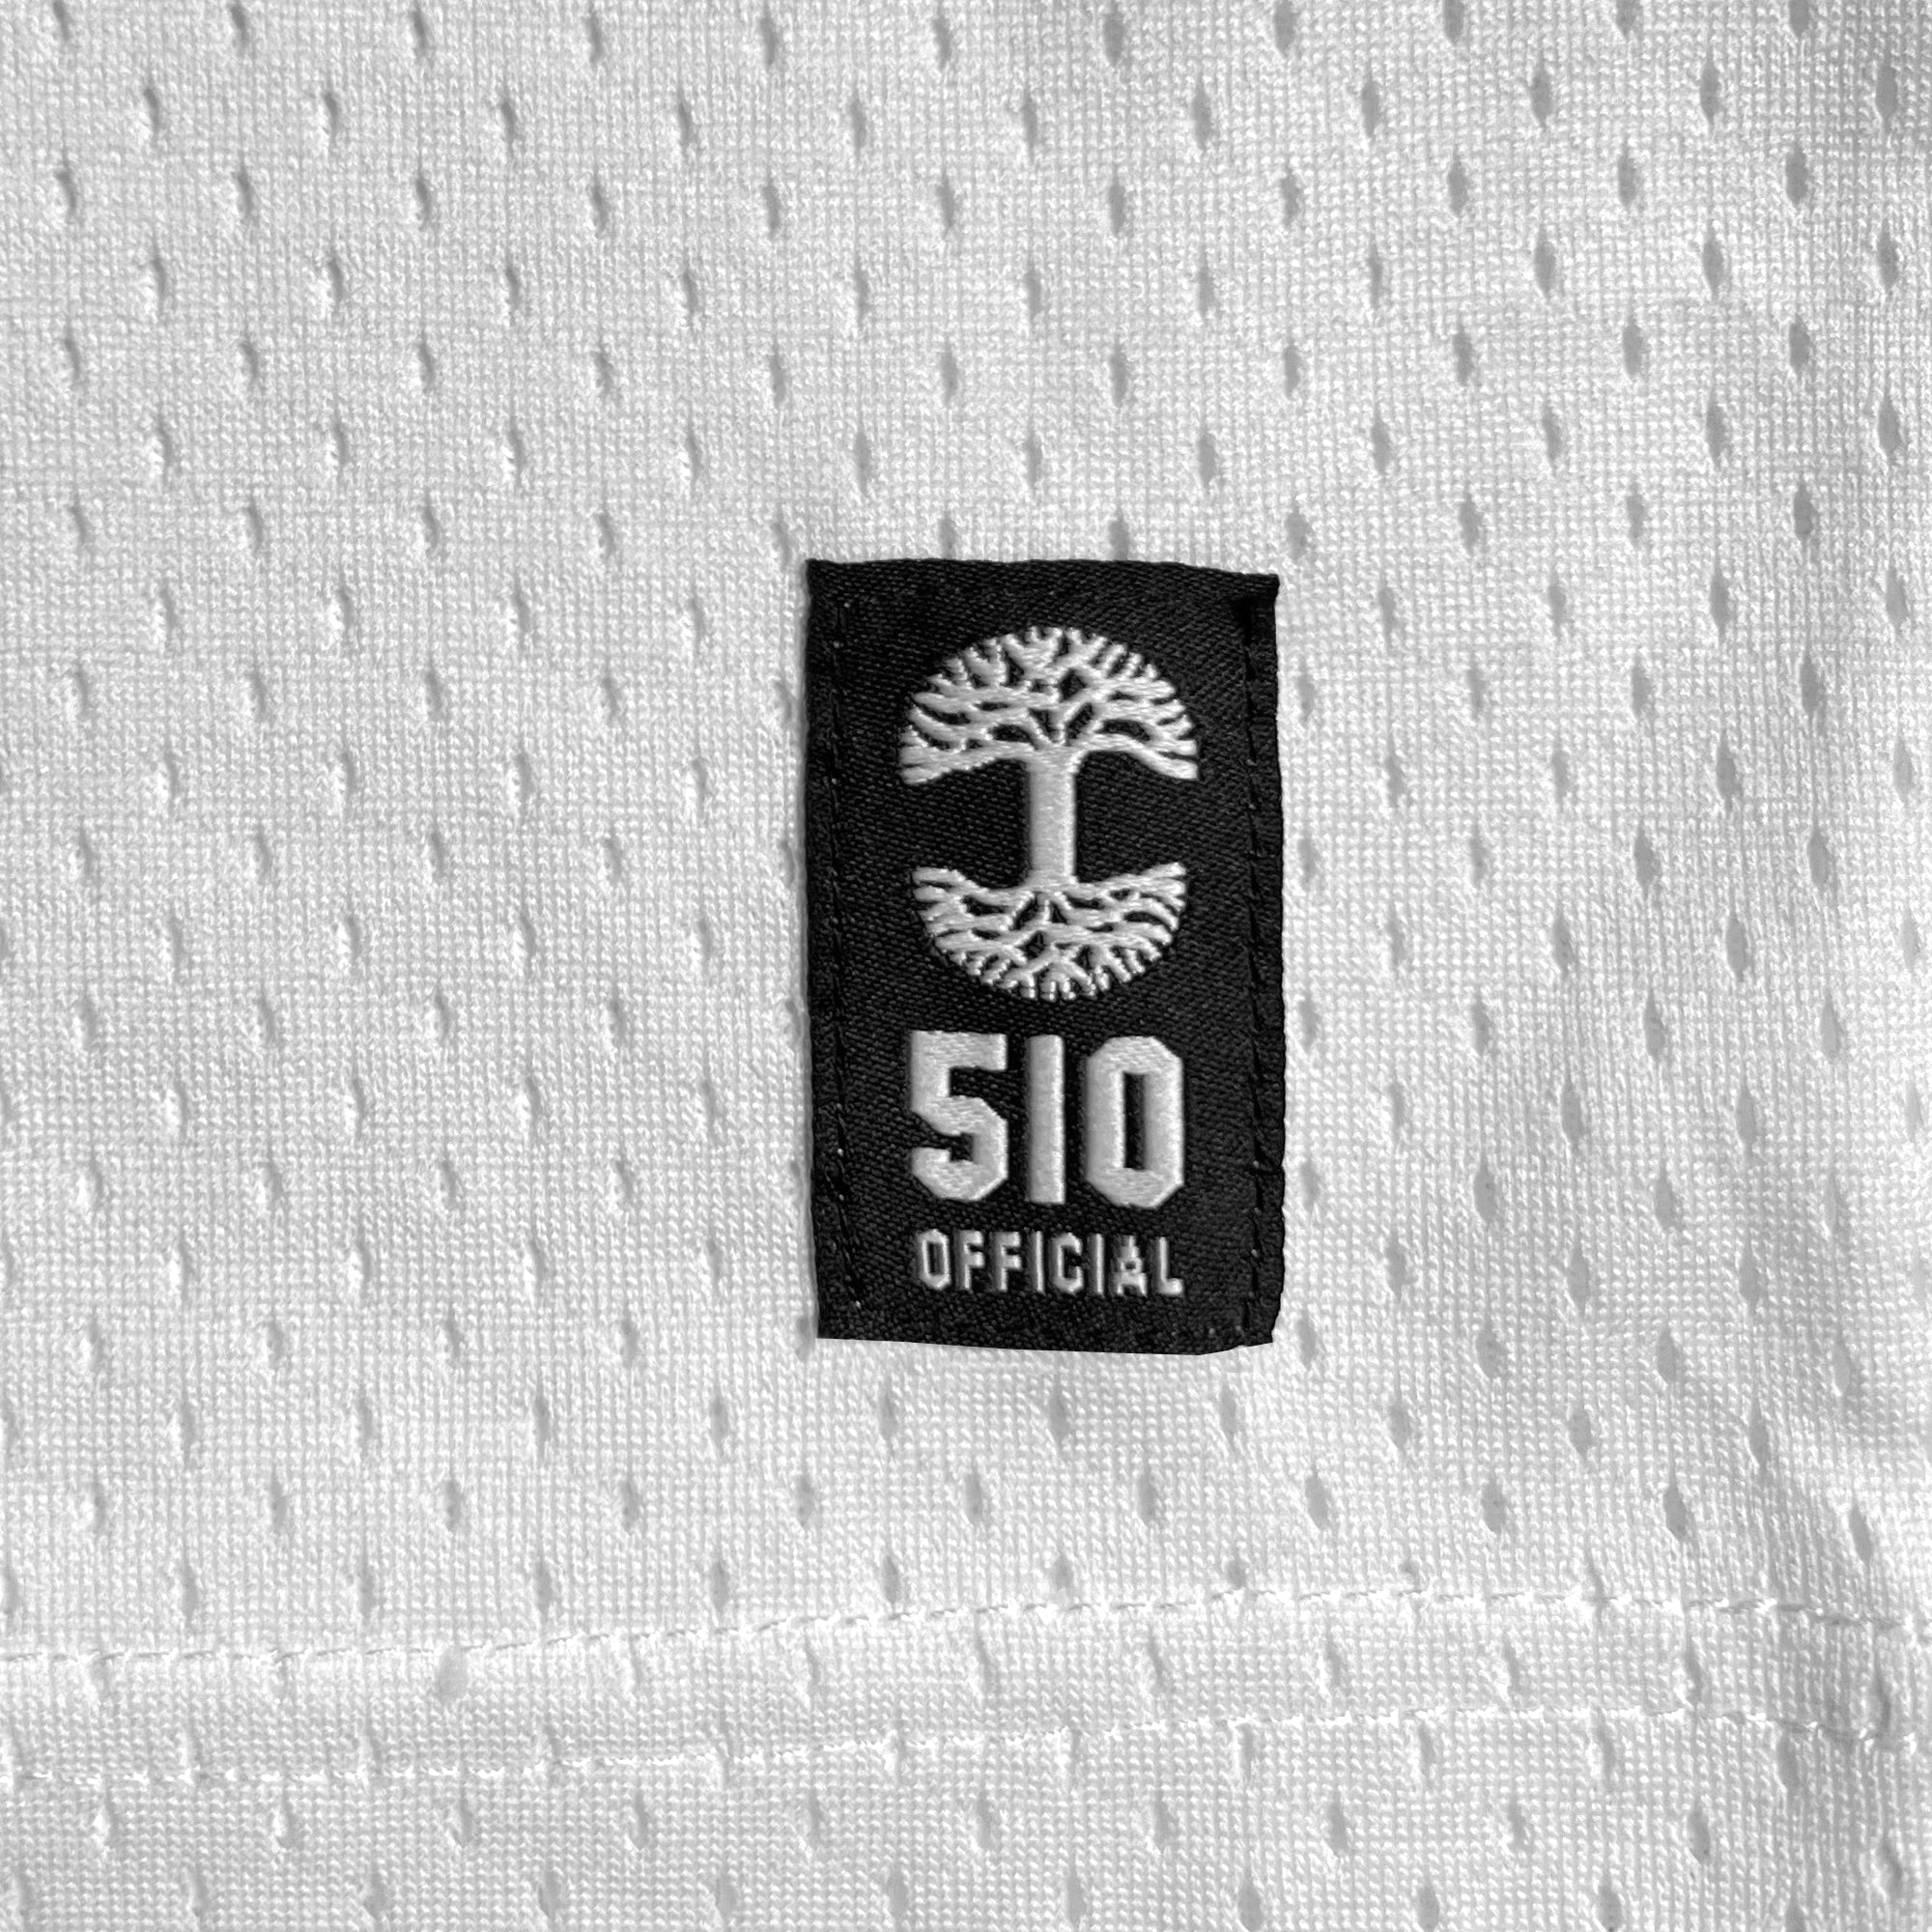 Black Oaklandish tree logo and 510 Official patch on a white mesh football jersey.